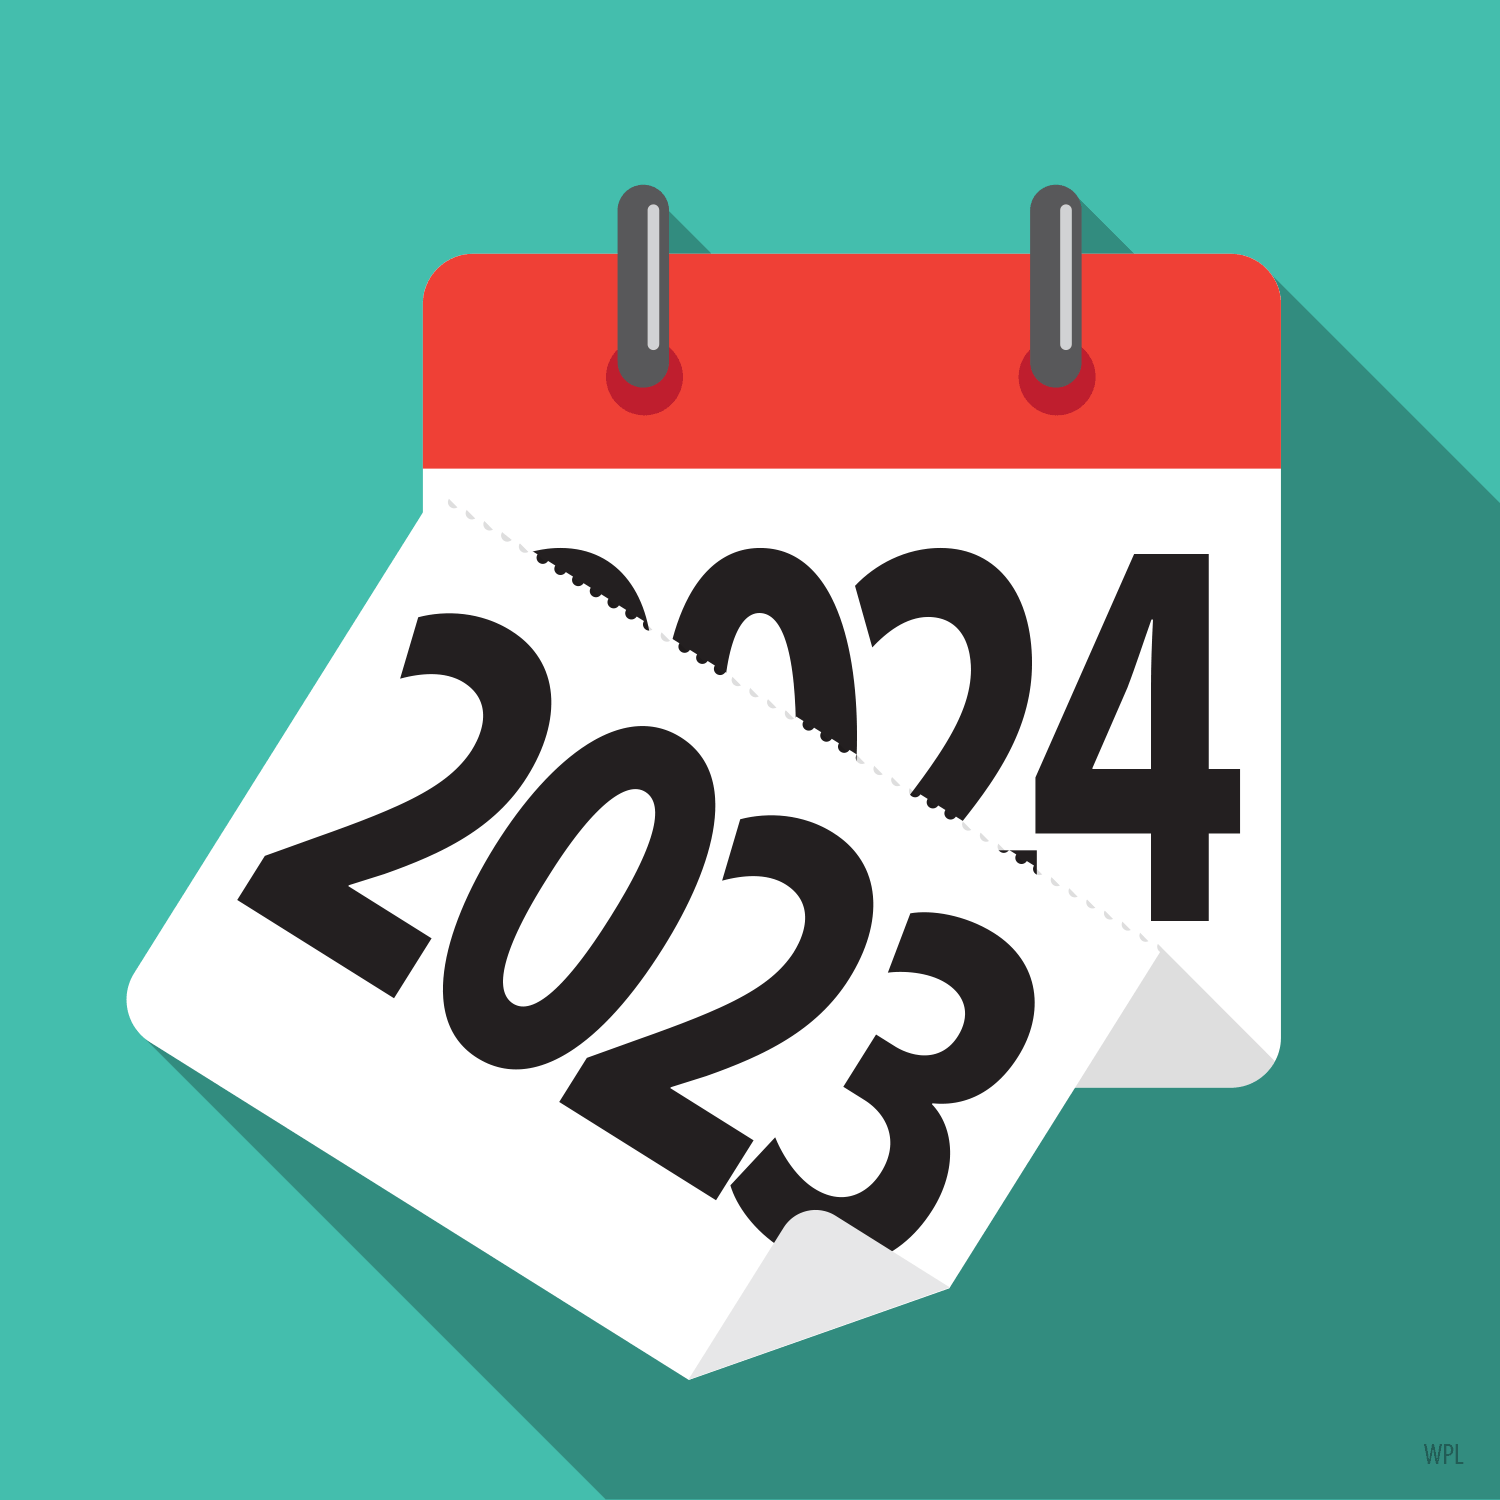 Calendar flipping from 2023 to 2024